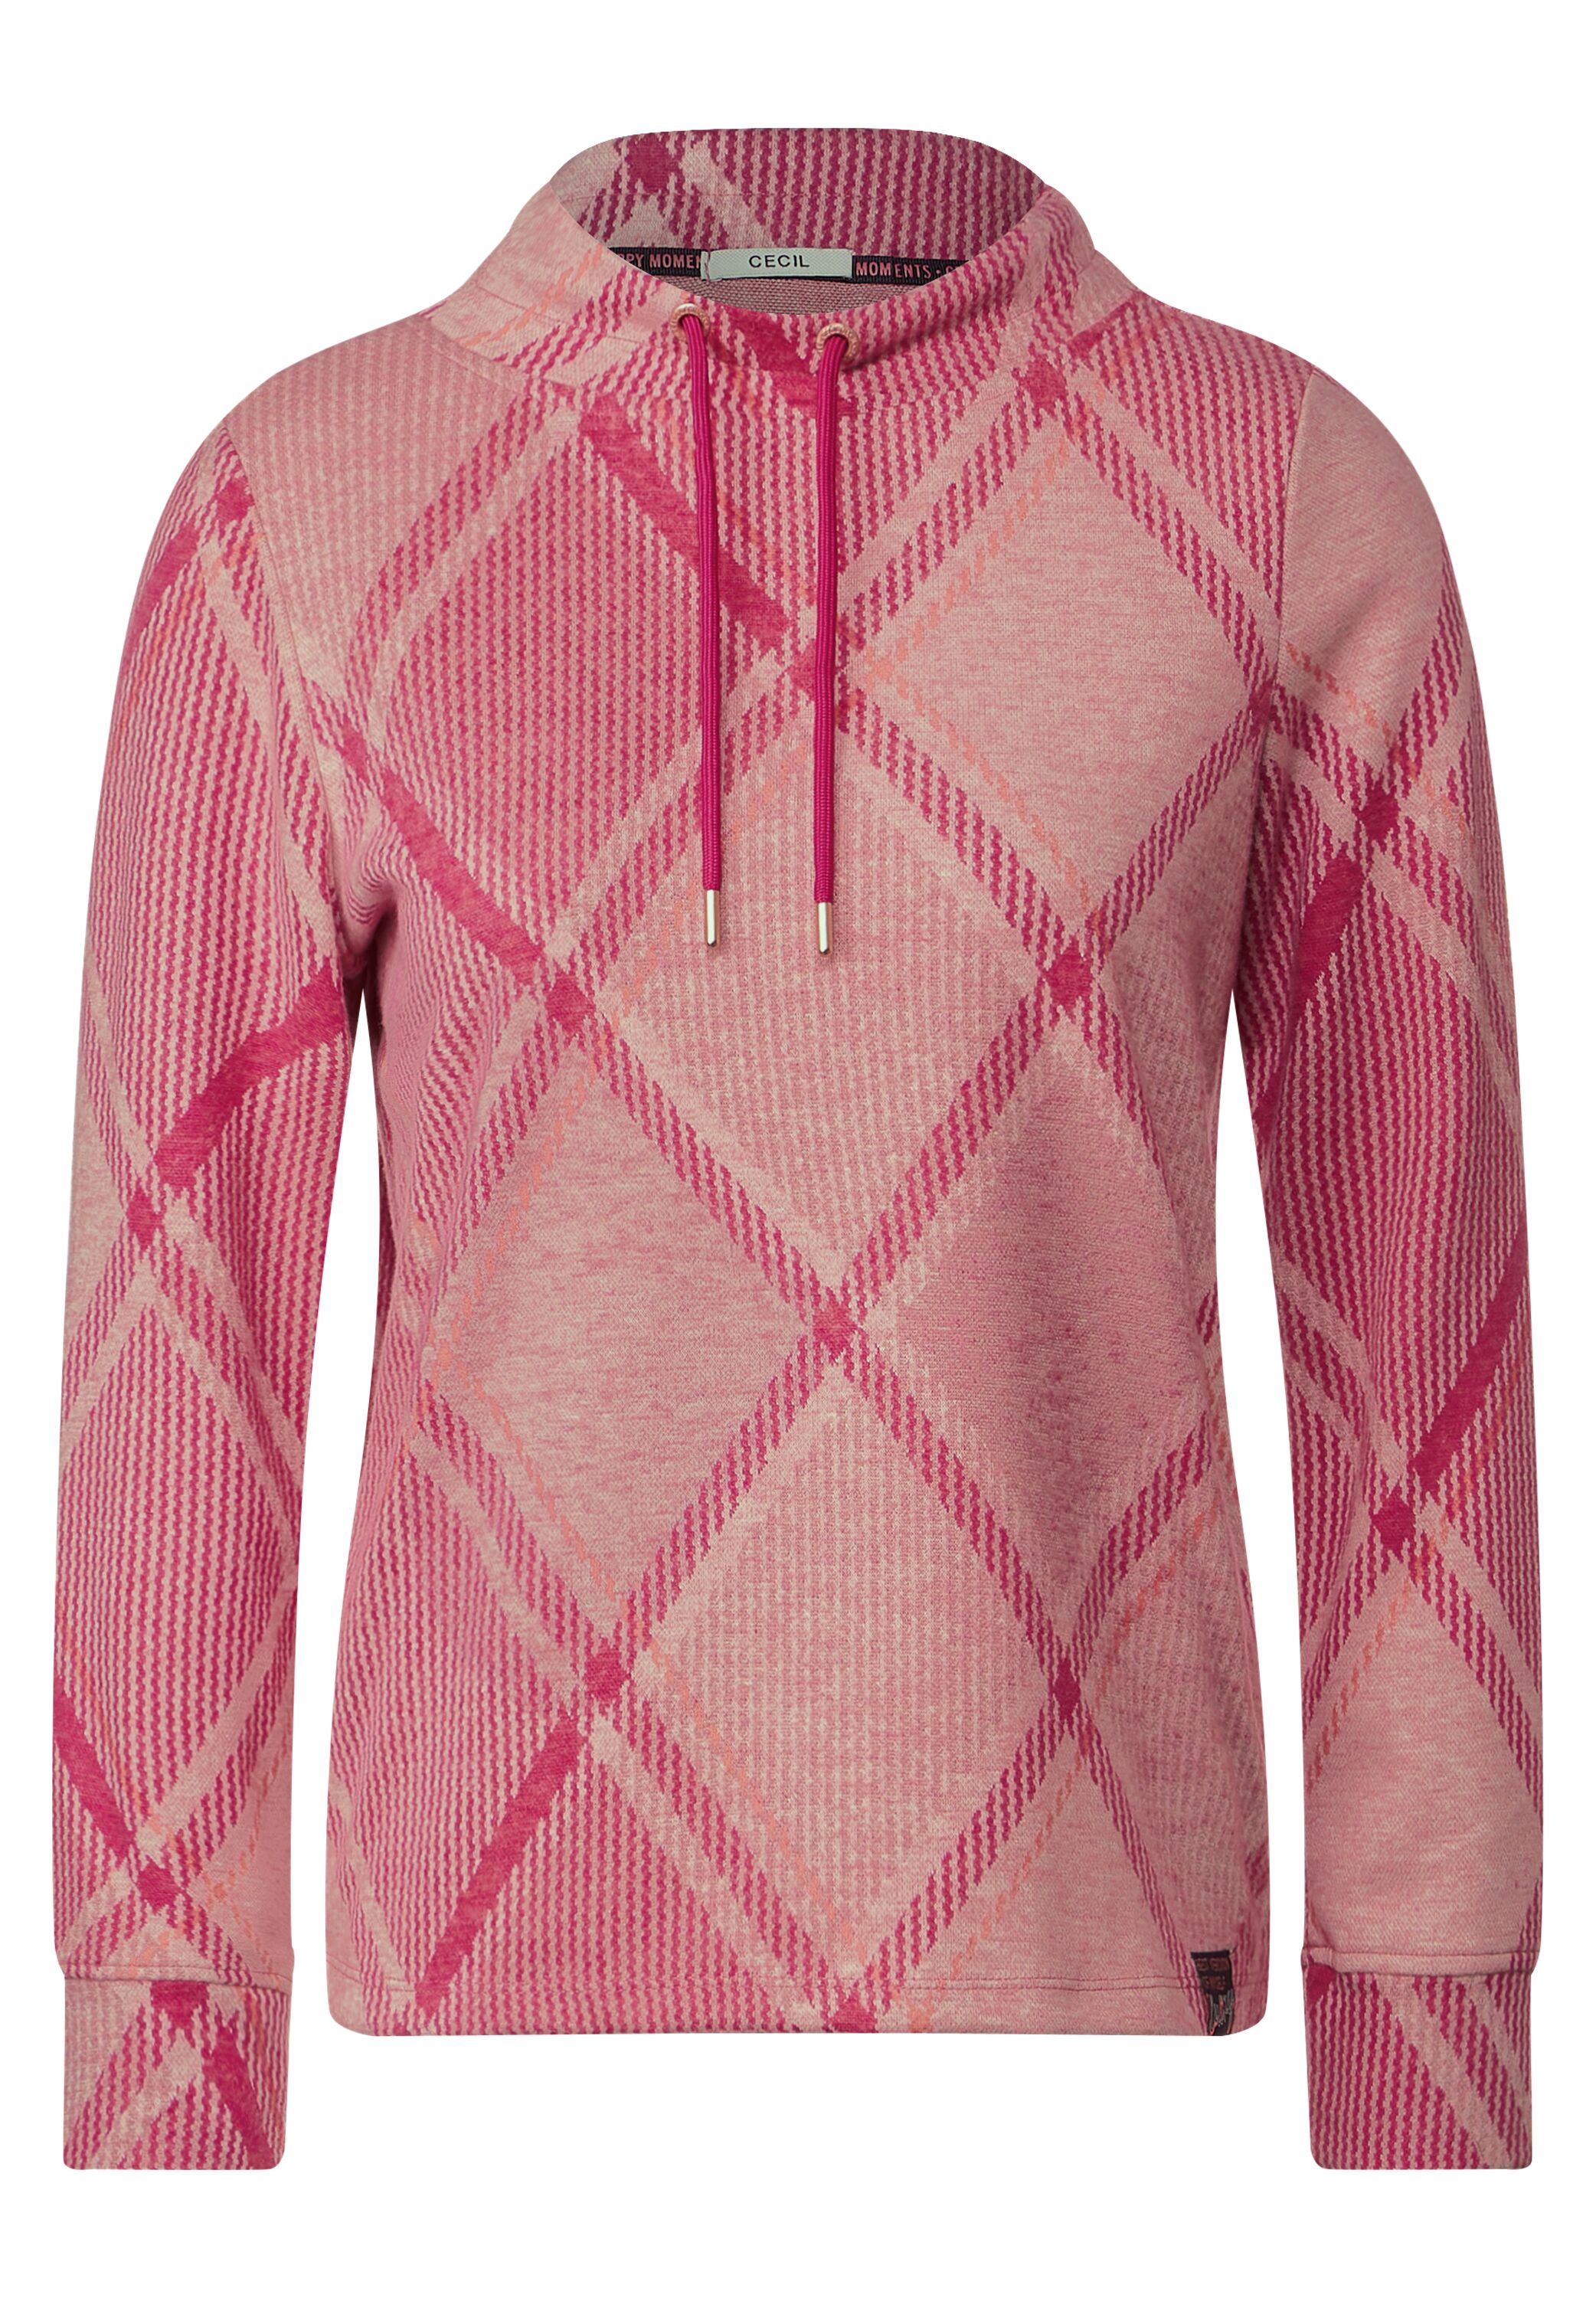 CECIL Langarmshirt in Cosy Coral im SALE reduziert B320545-35068 - CONCEPT  Mode